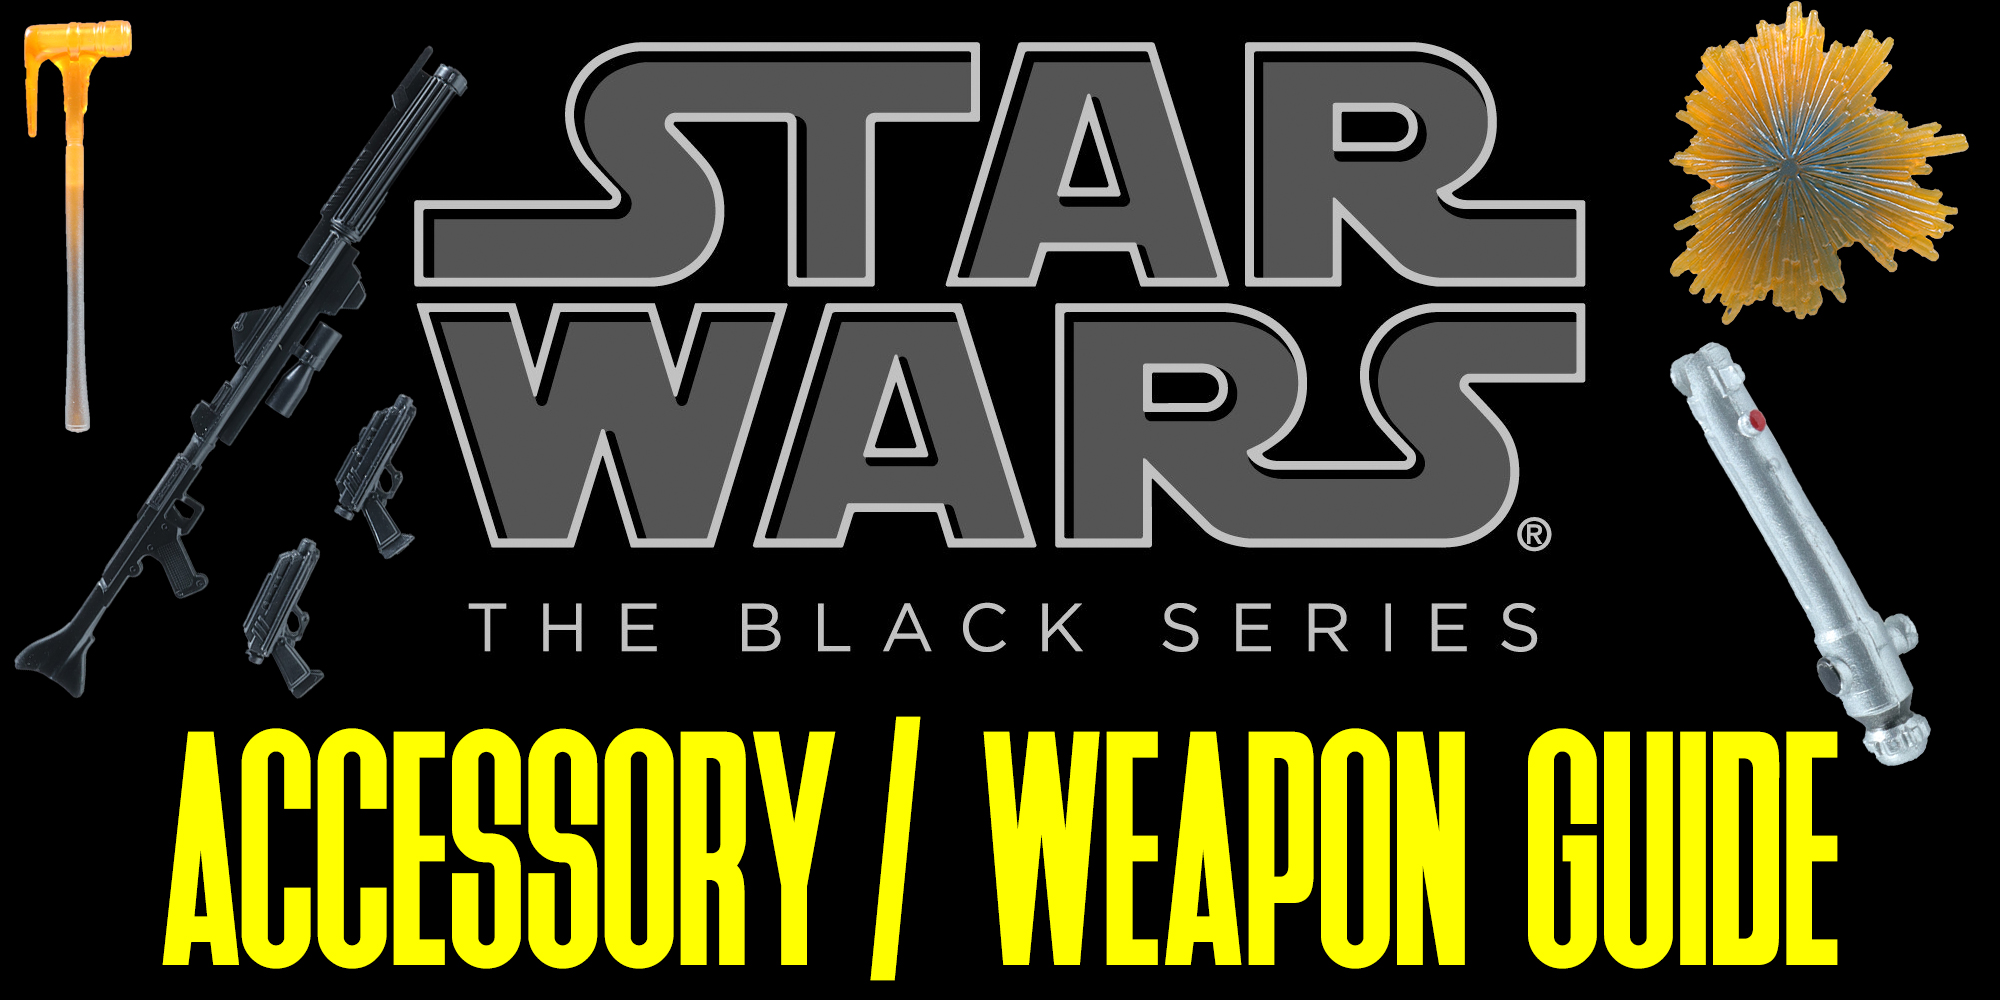 The Black Series Accessory And Weapons Guide Is Here!